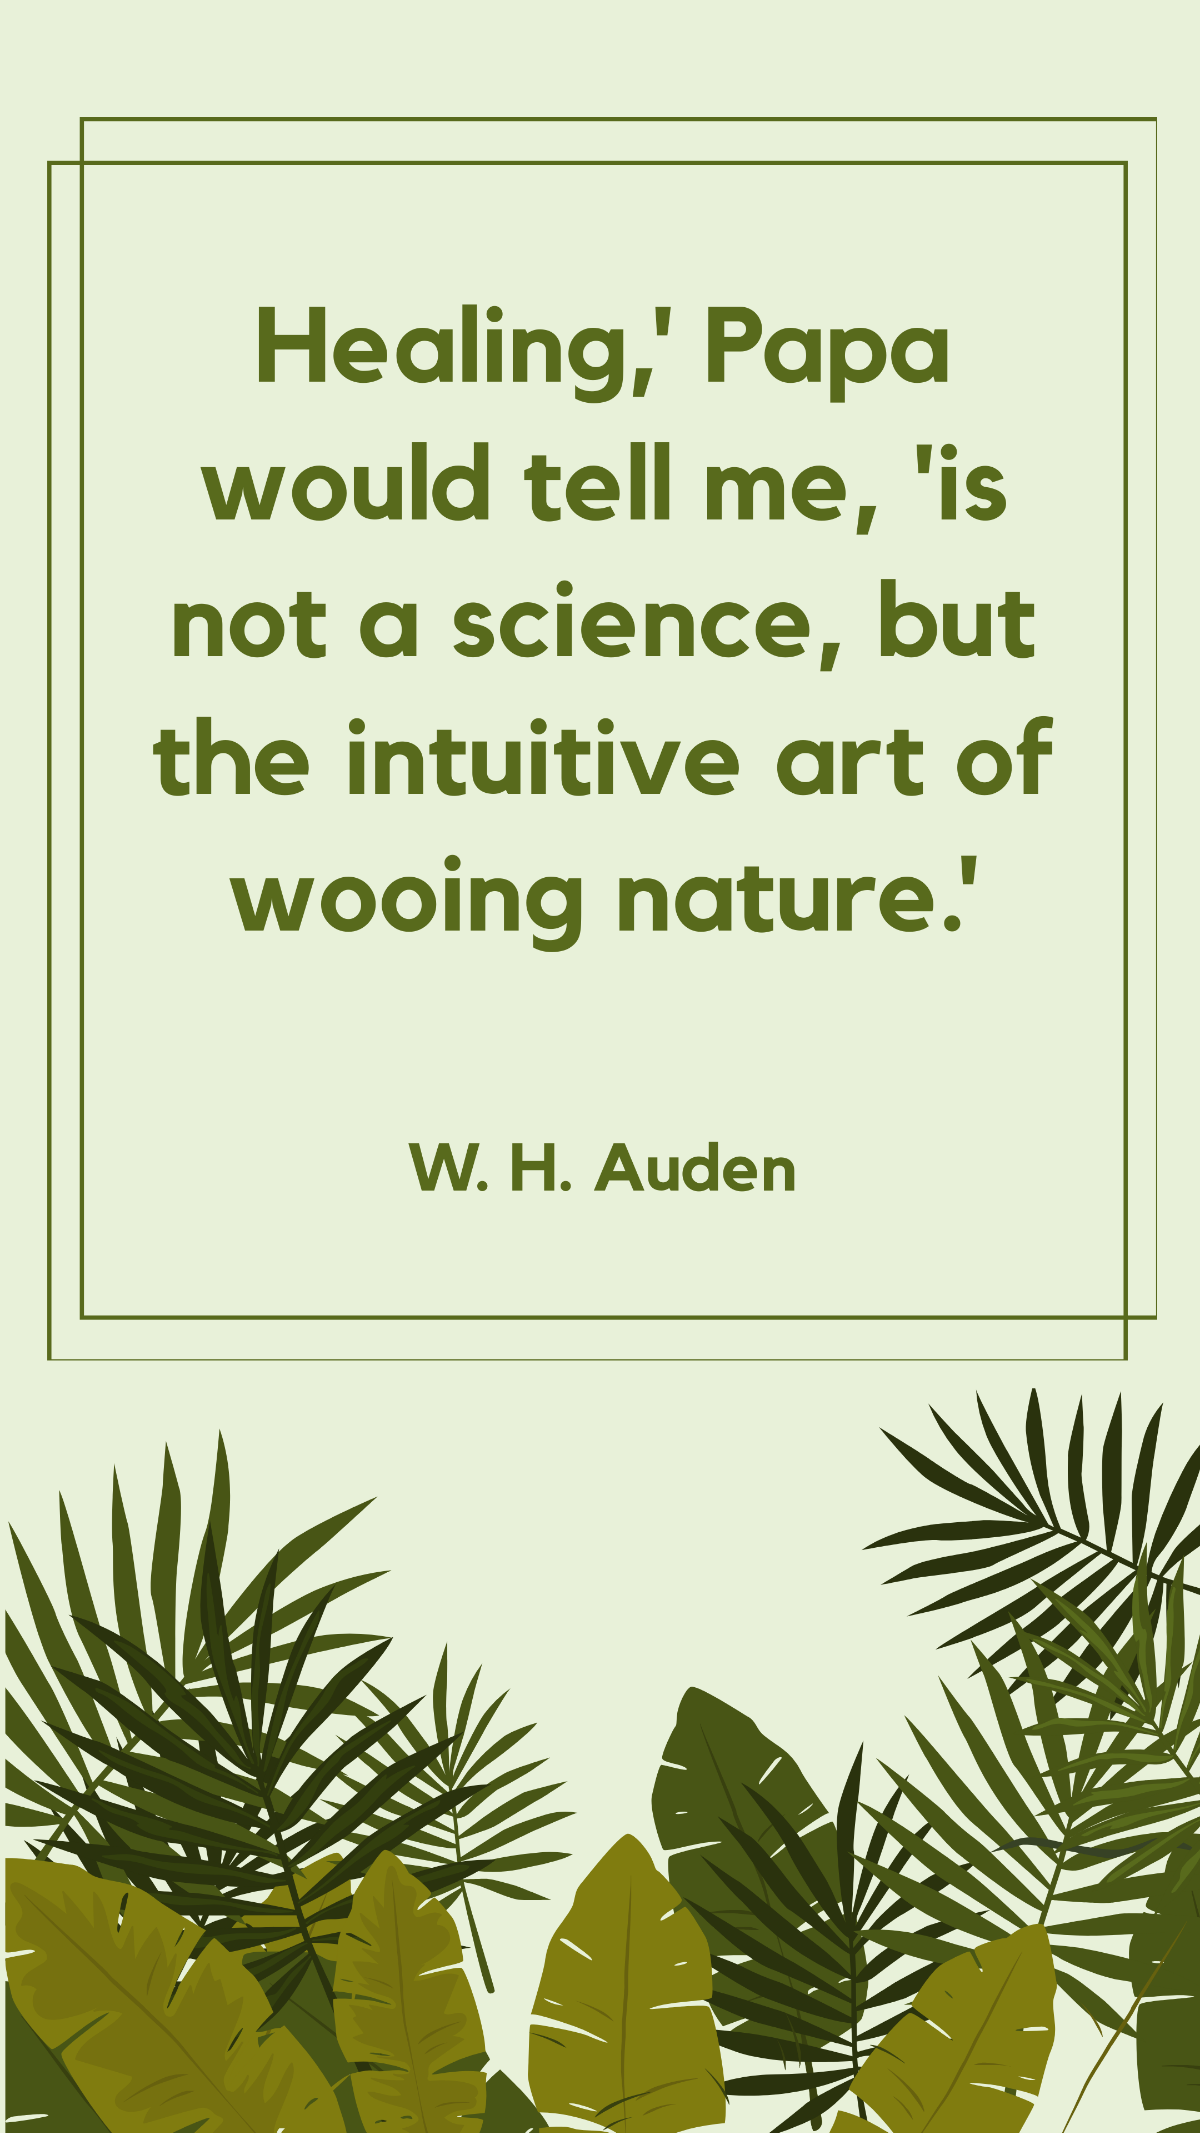 Free W. H. Auden - Healing,' Papa would tell me, 'is not a science, but the intuitive art of wooing nature.' Template